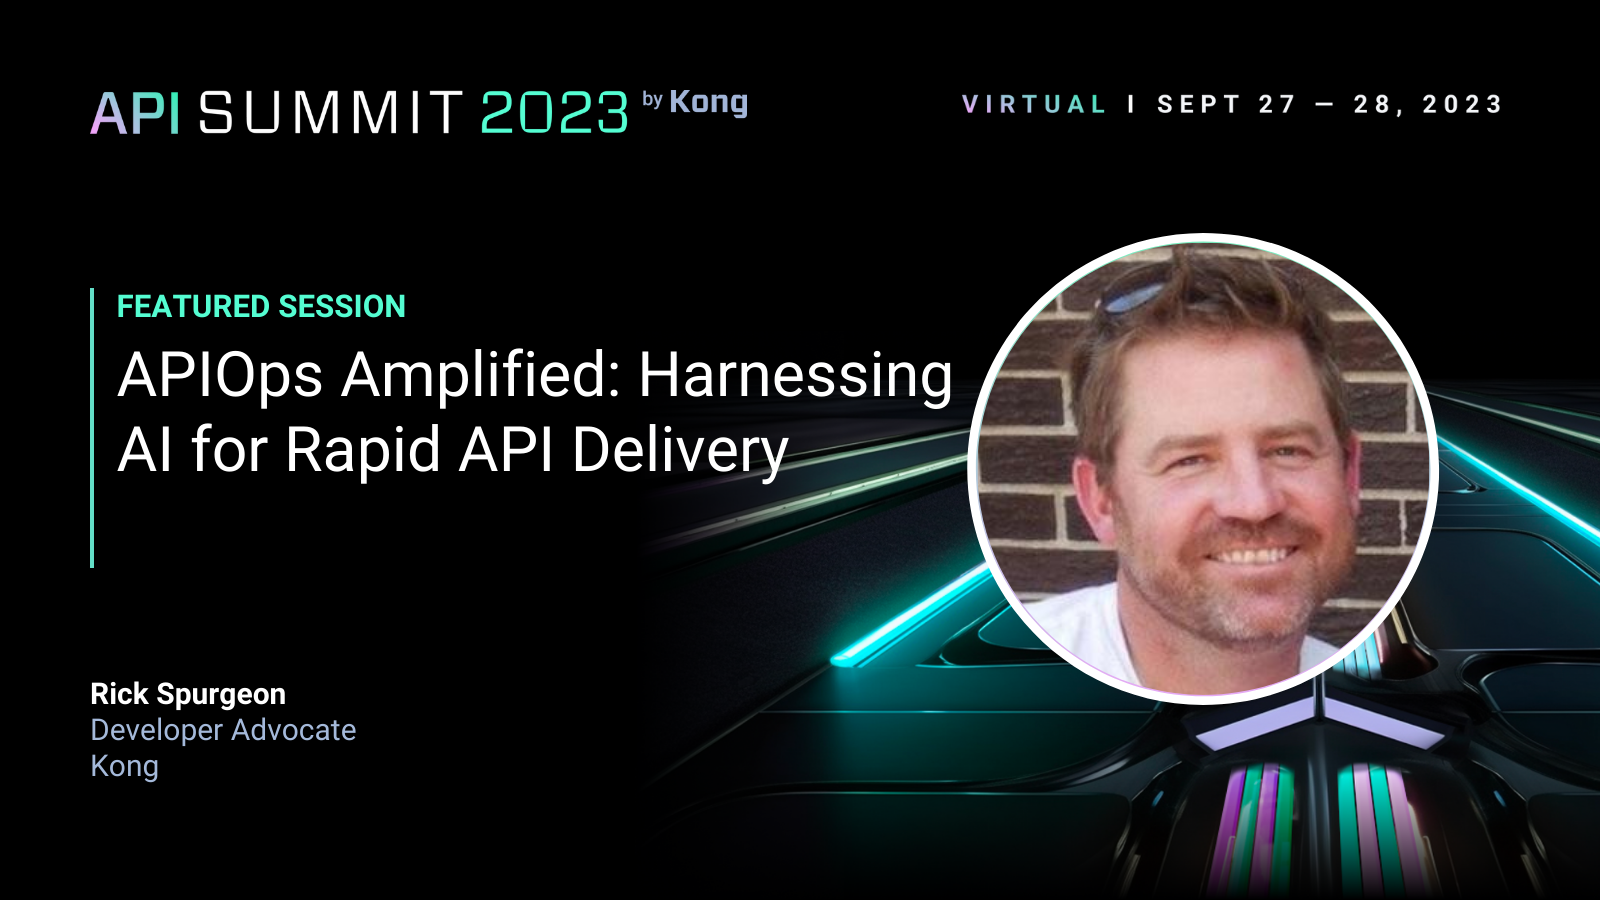 APIOps Amplified: Harnessing AI for Rapid API Delivery